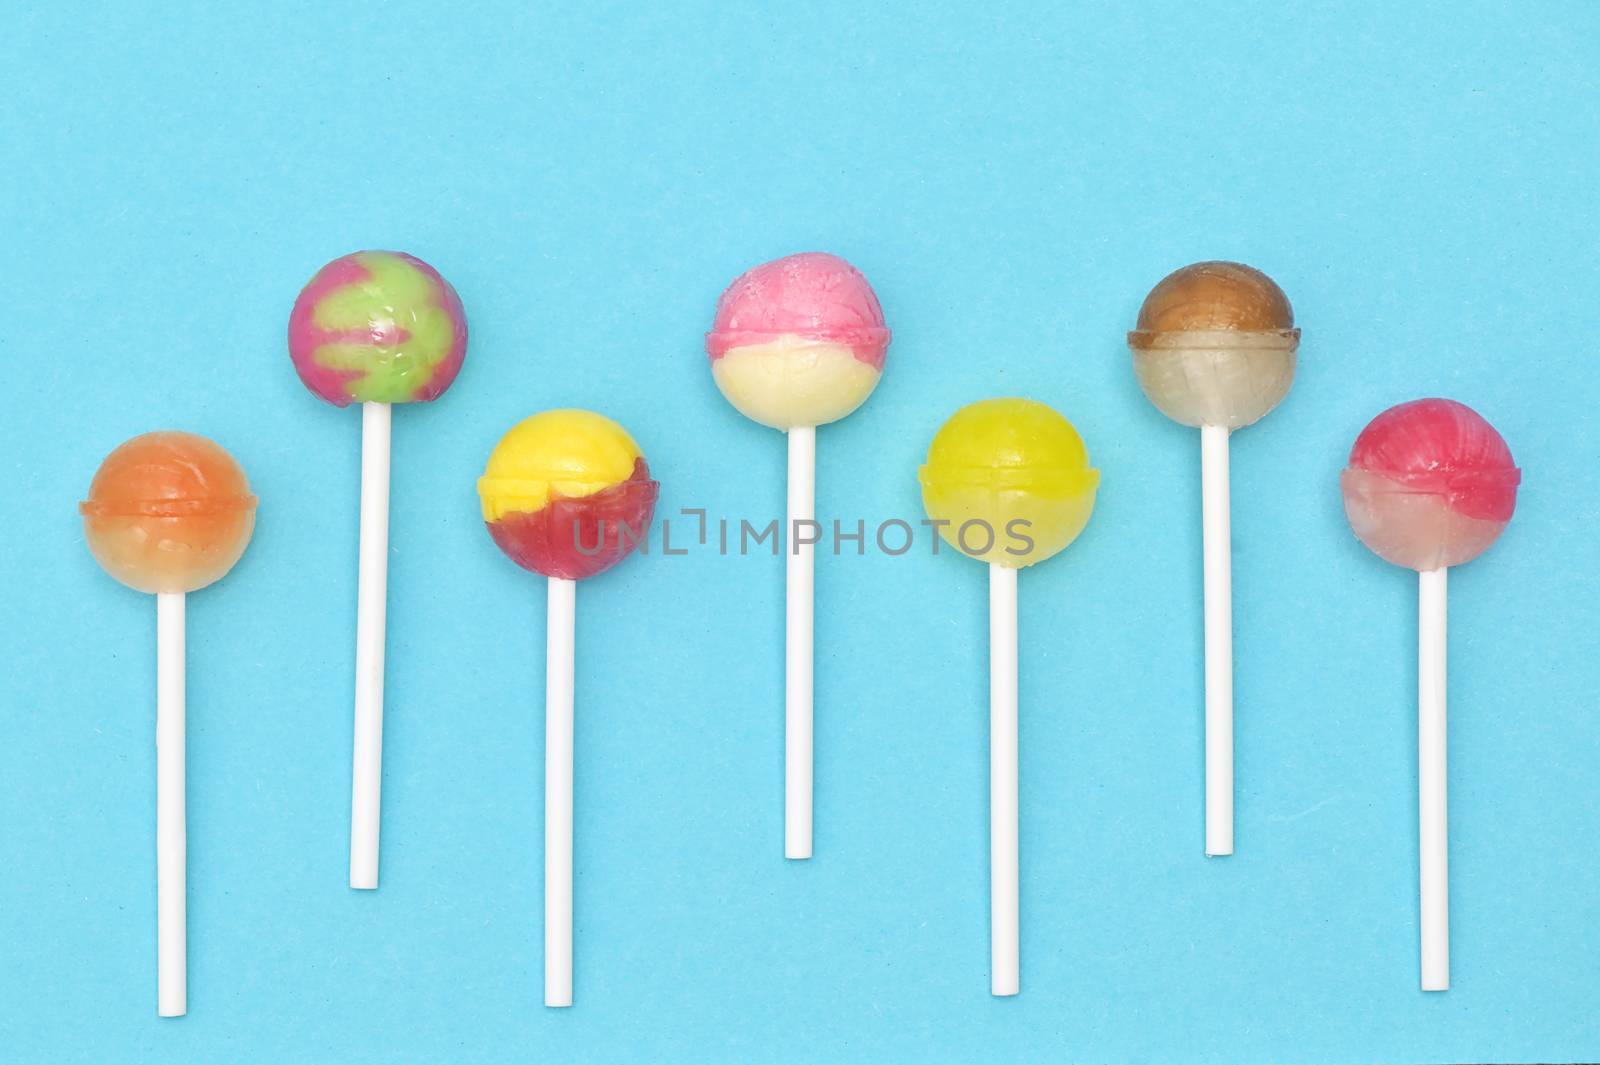 Abstract Colorful Lollipop Candy On Stick